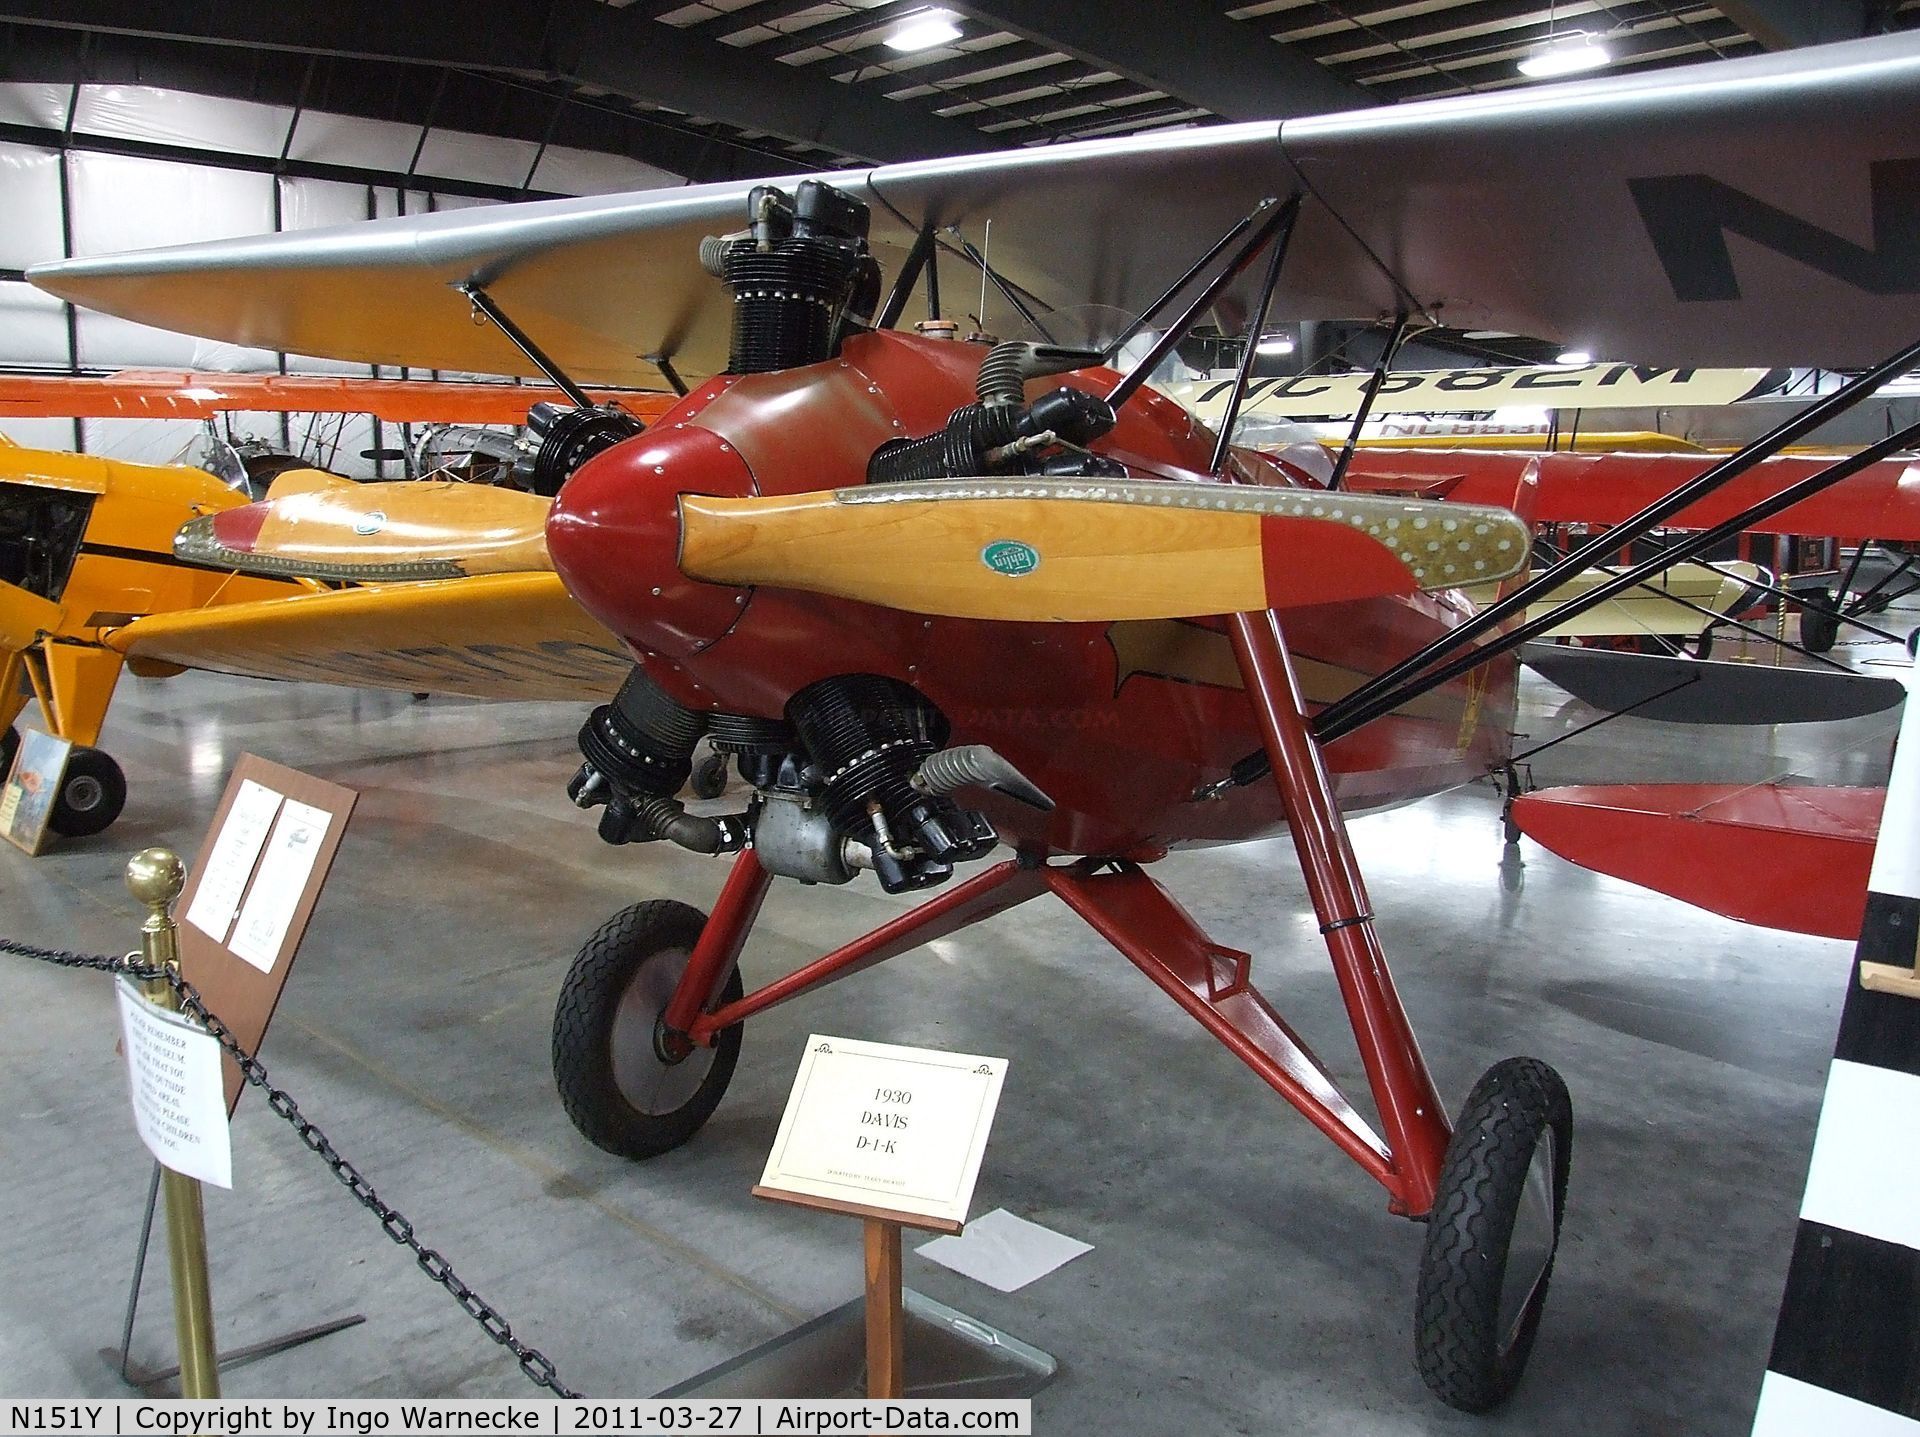 N151Y, 1930 Davis D-1-K C/N 510, Davis D-1-K at the Western Antique Aeroplane and Automobile Museum, Hood River OR